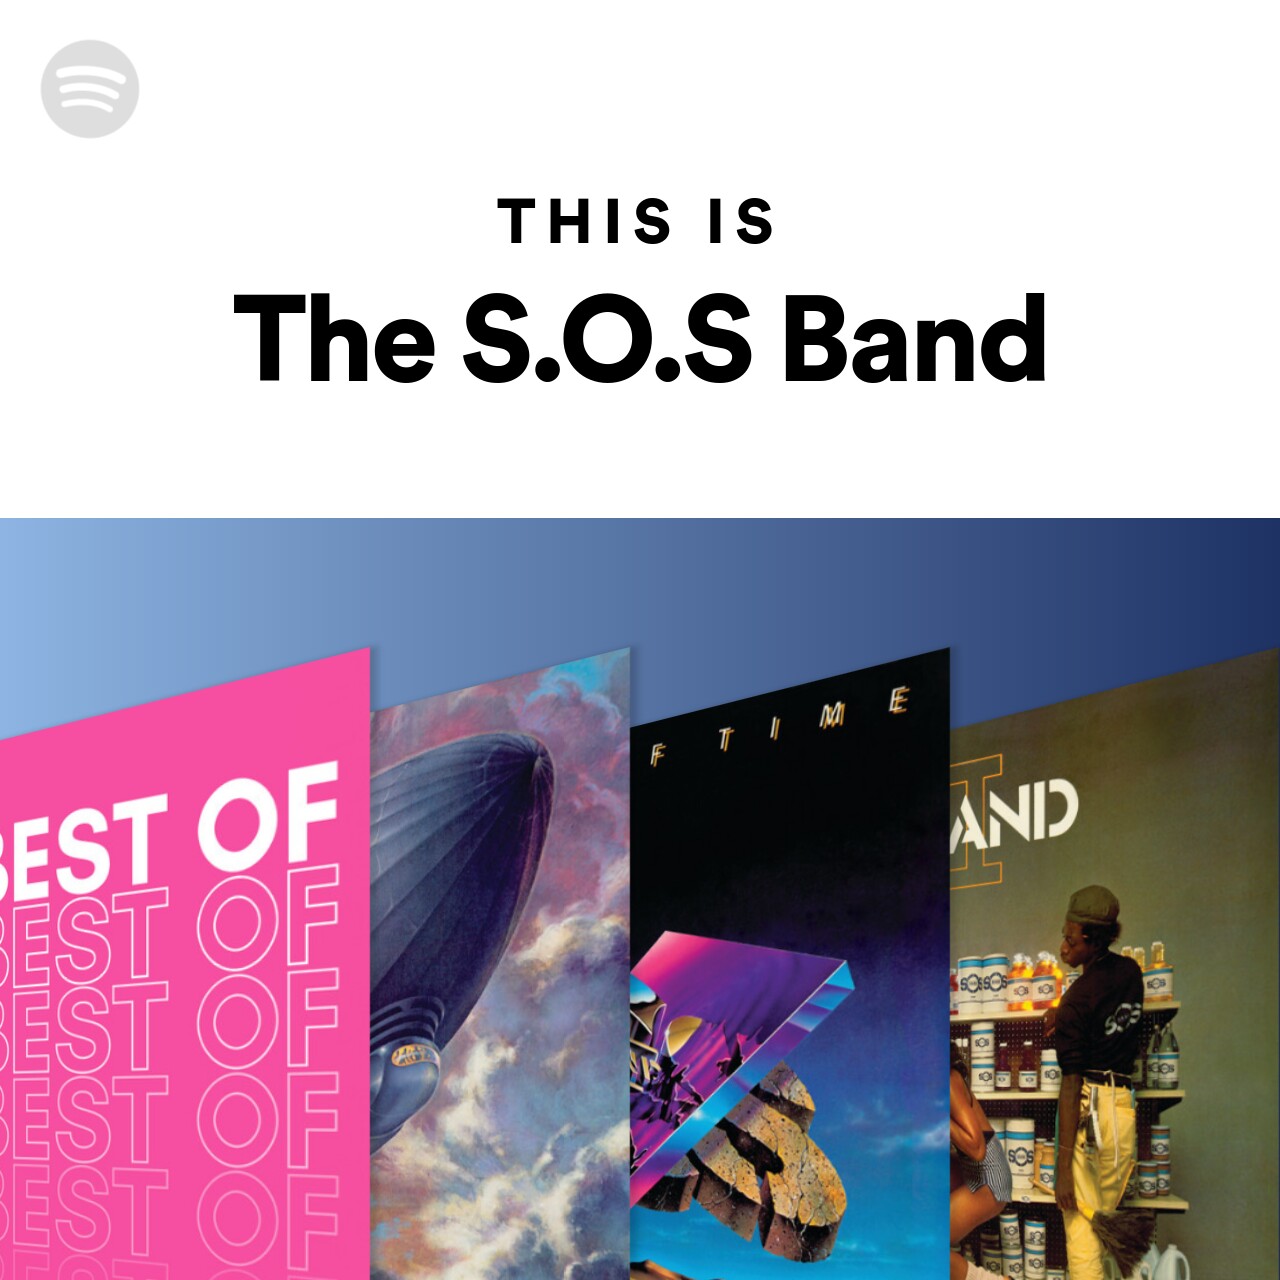 This Is The S.O.S Band